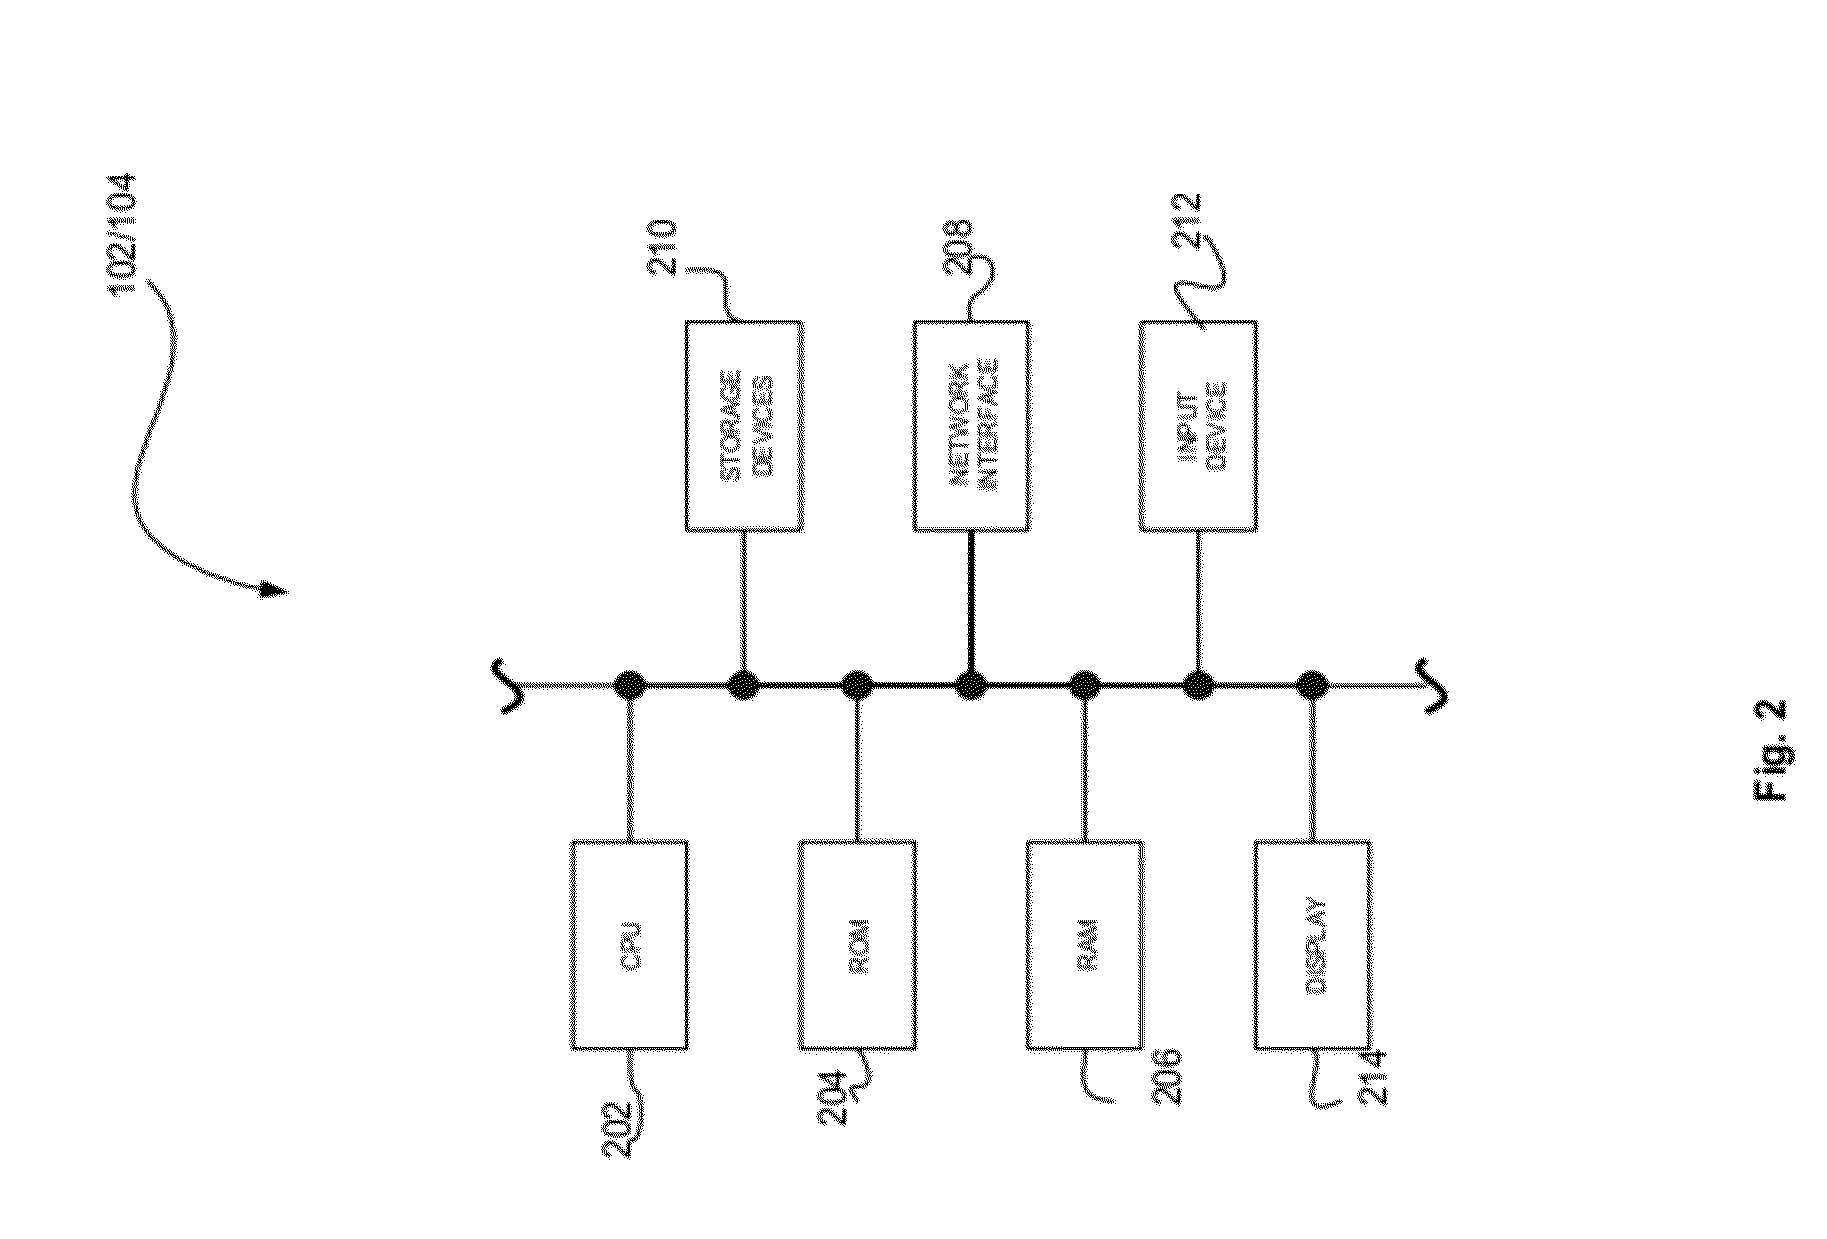 Method and system for compiling a consumer-based electronic database, searchable according to individual internet user-defined micro-demographics (II)